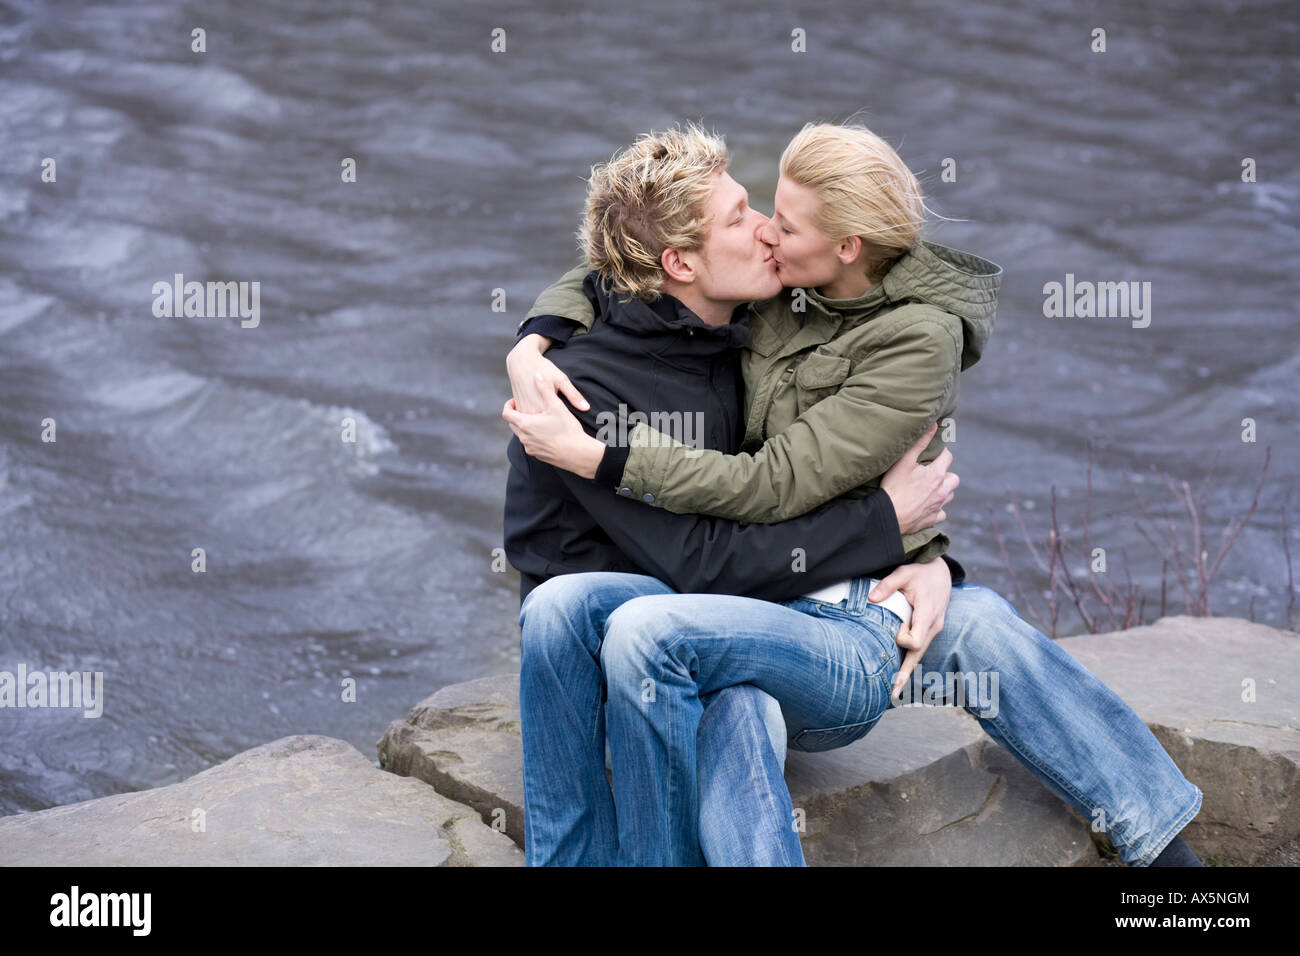 Couple kissing in front of water Stock Photo